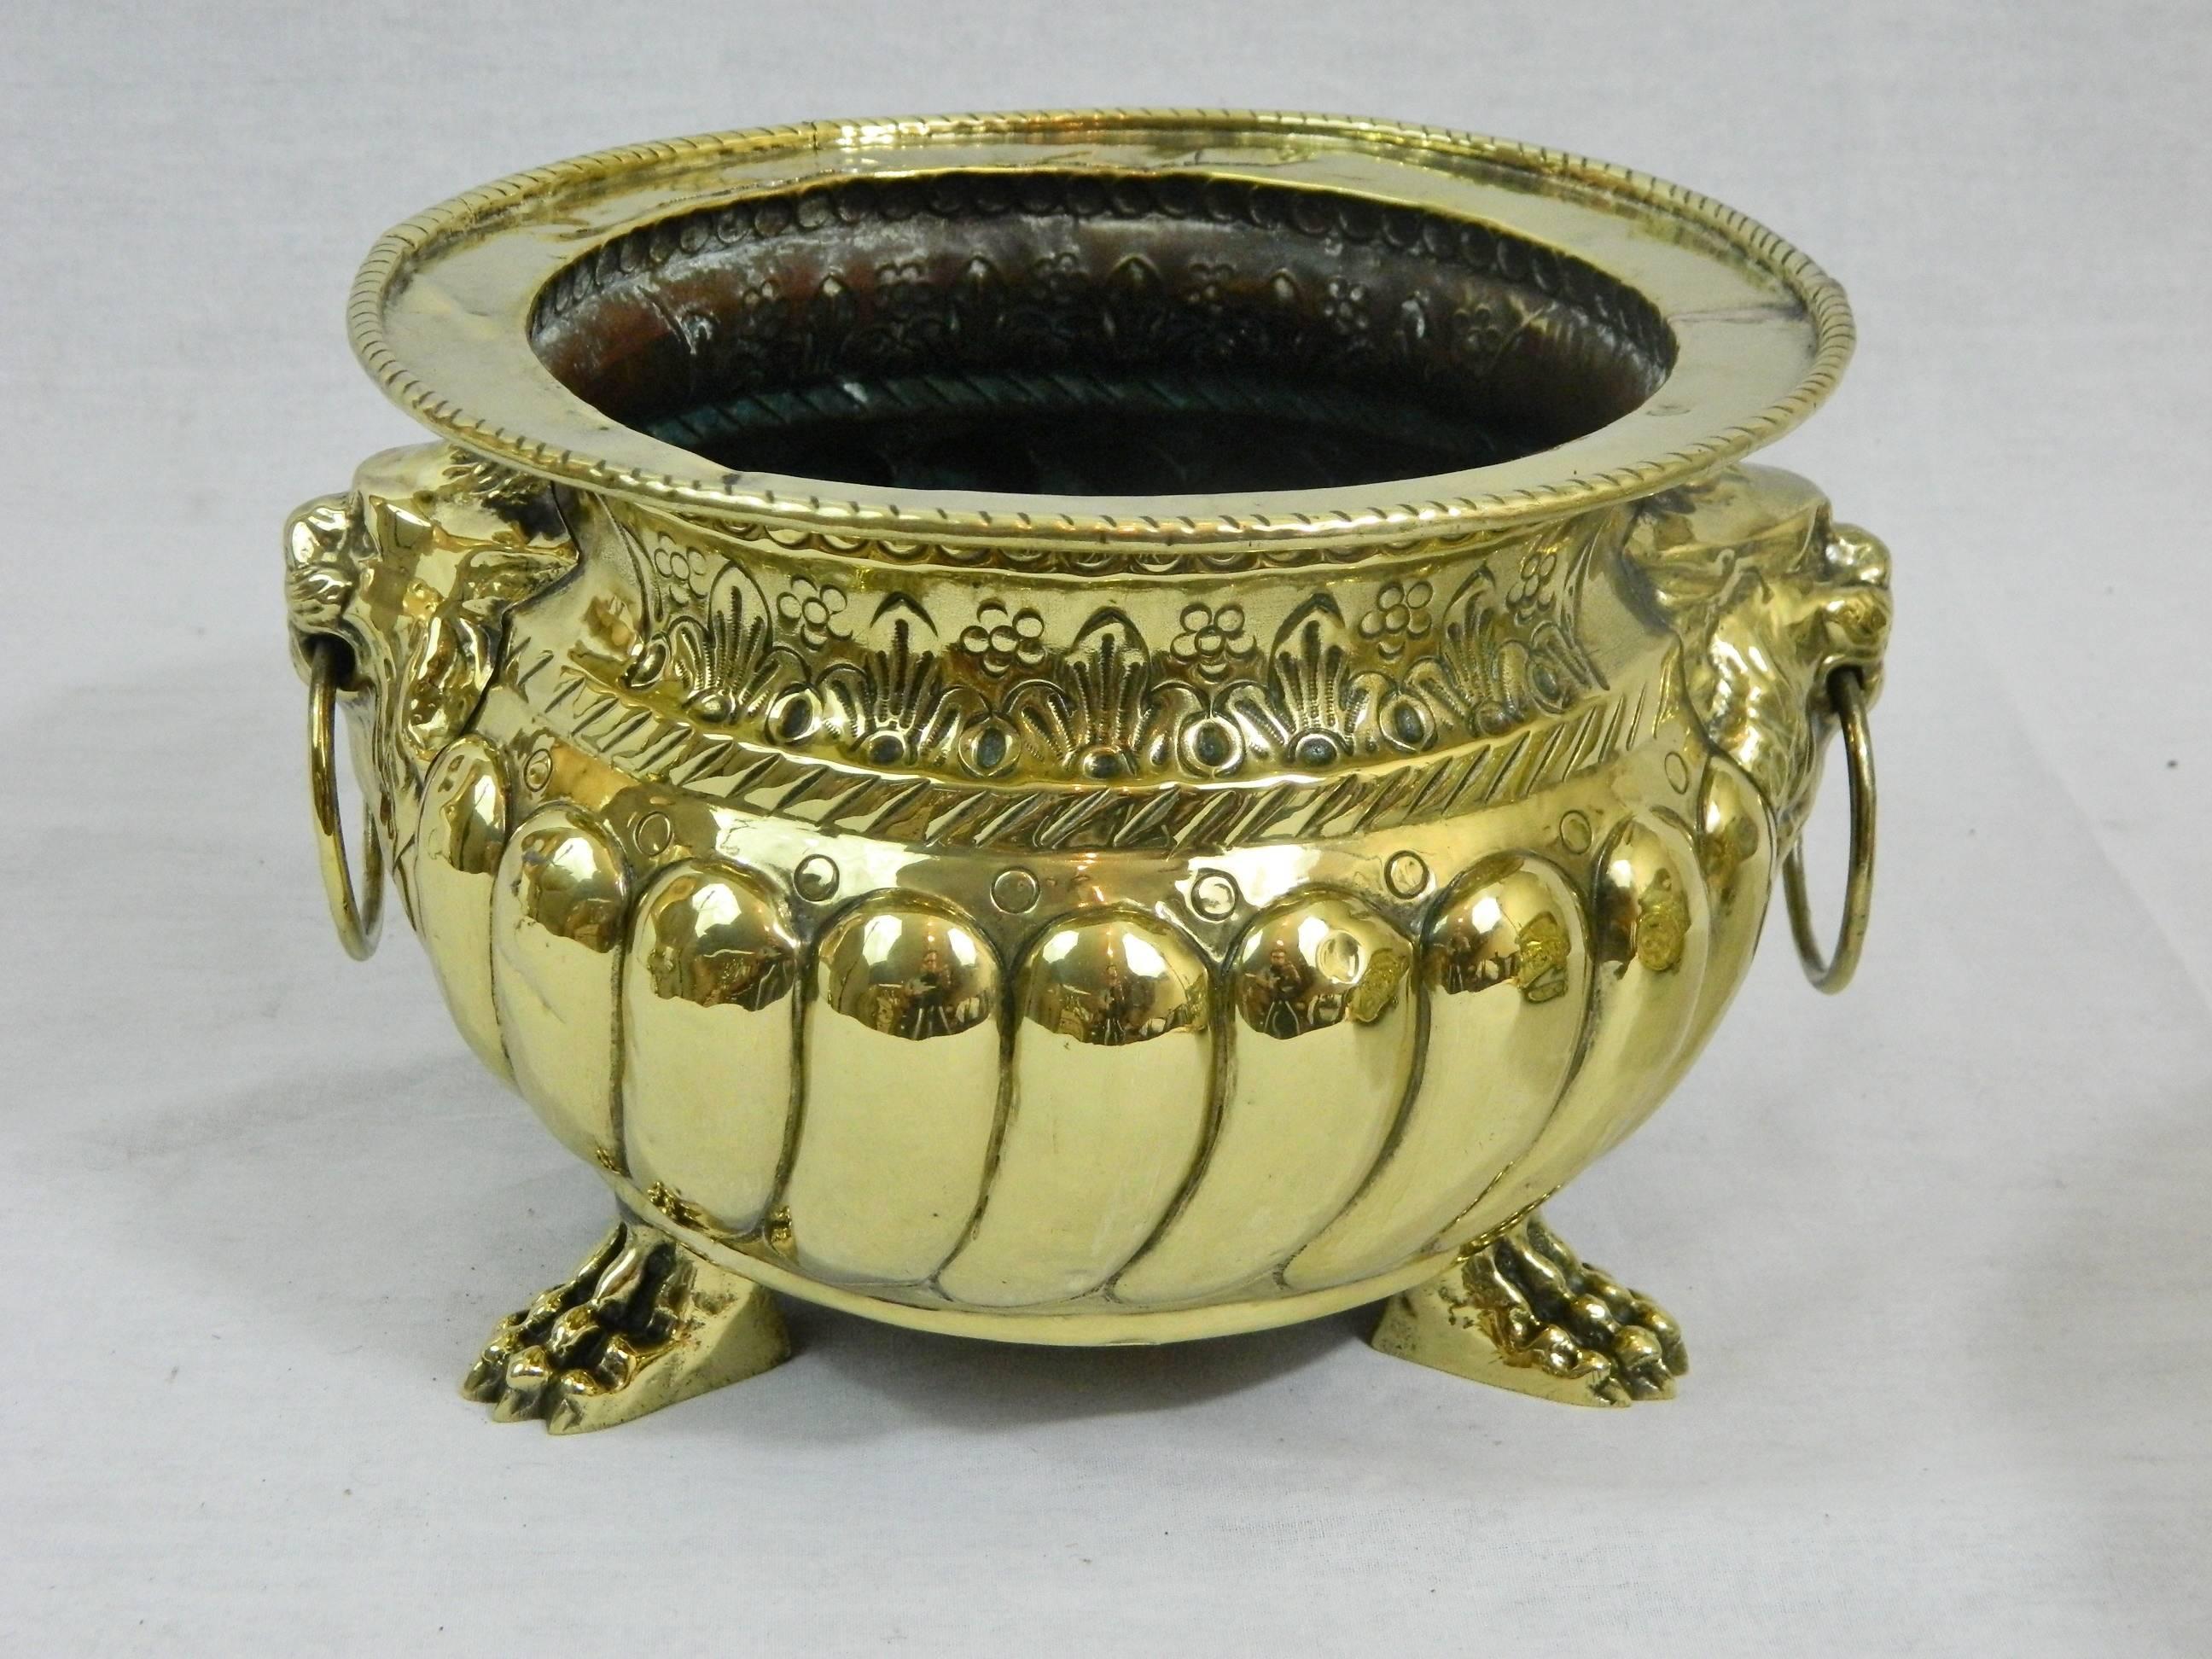 French Polished Brass Jardiniere or Planter with Cast Feet, 19th Century